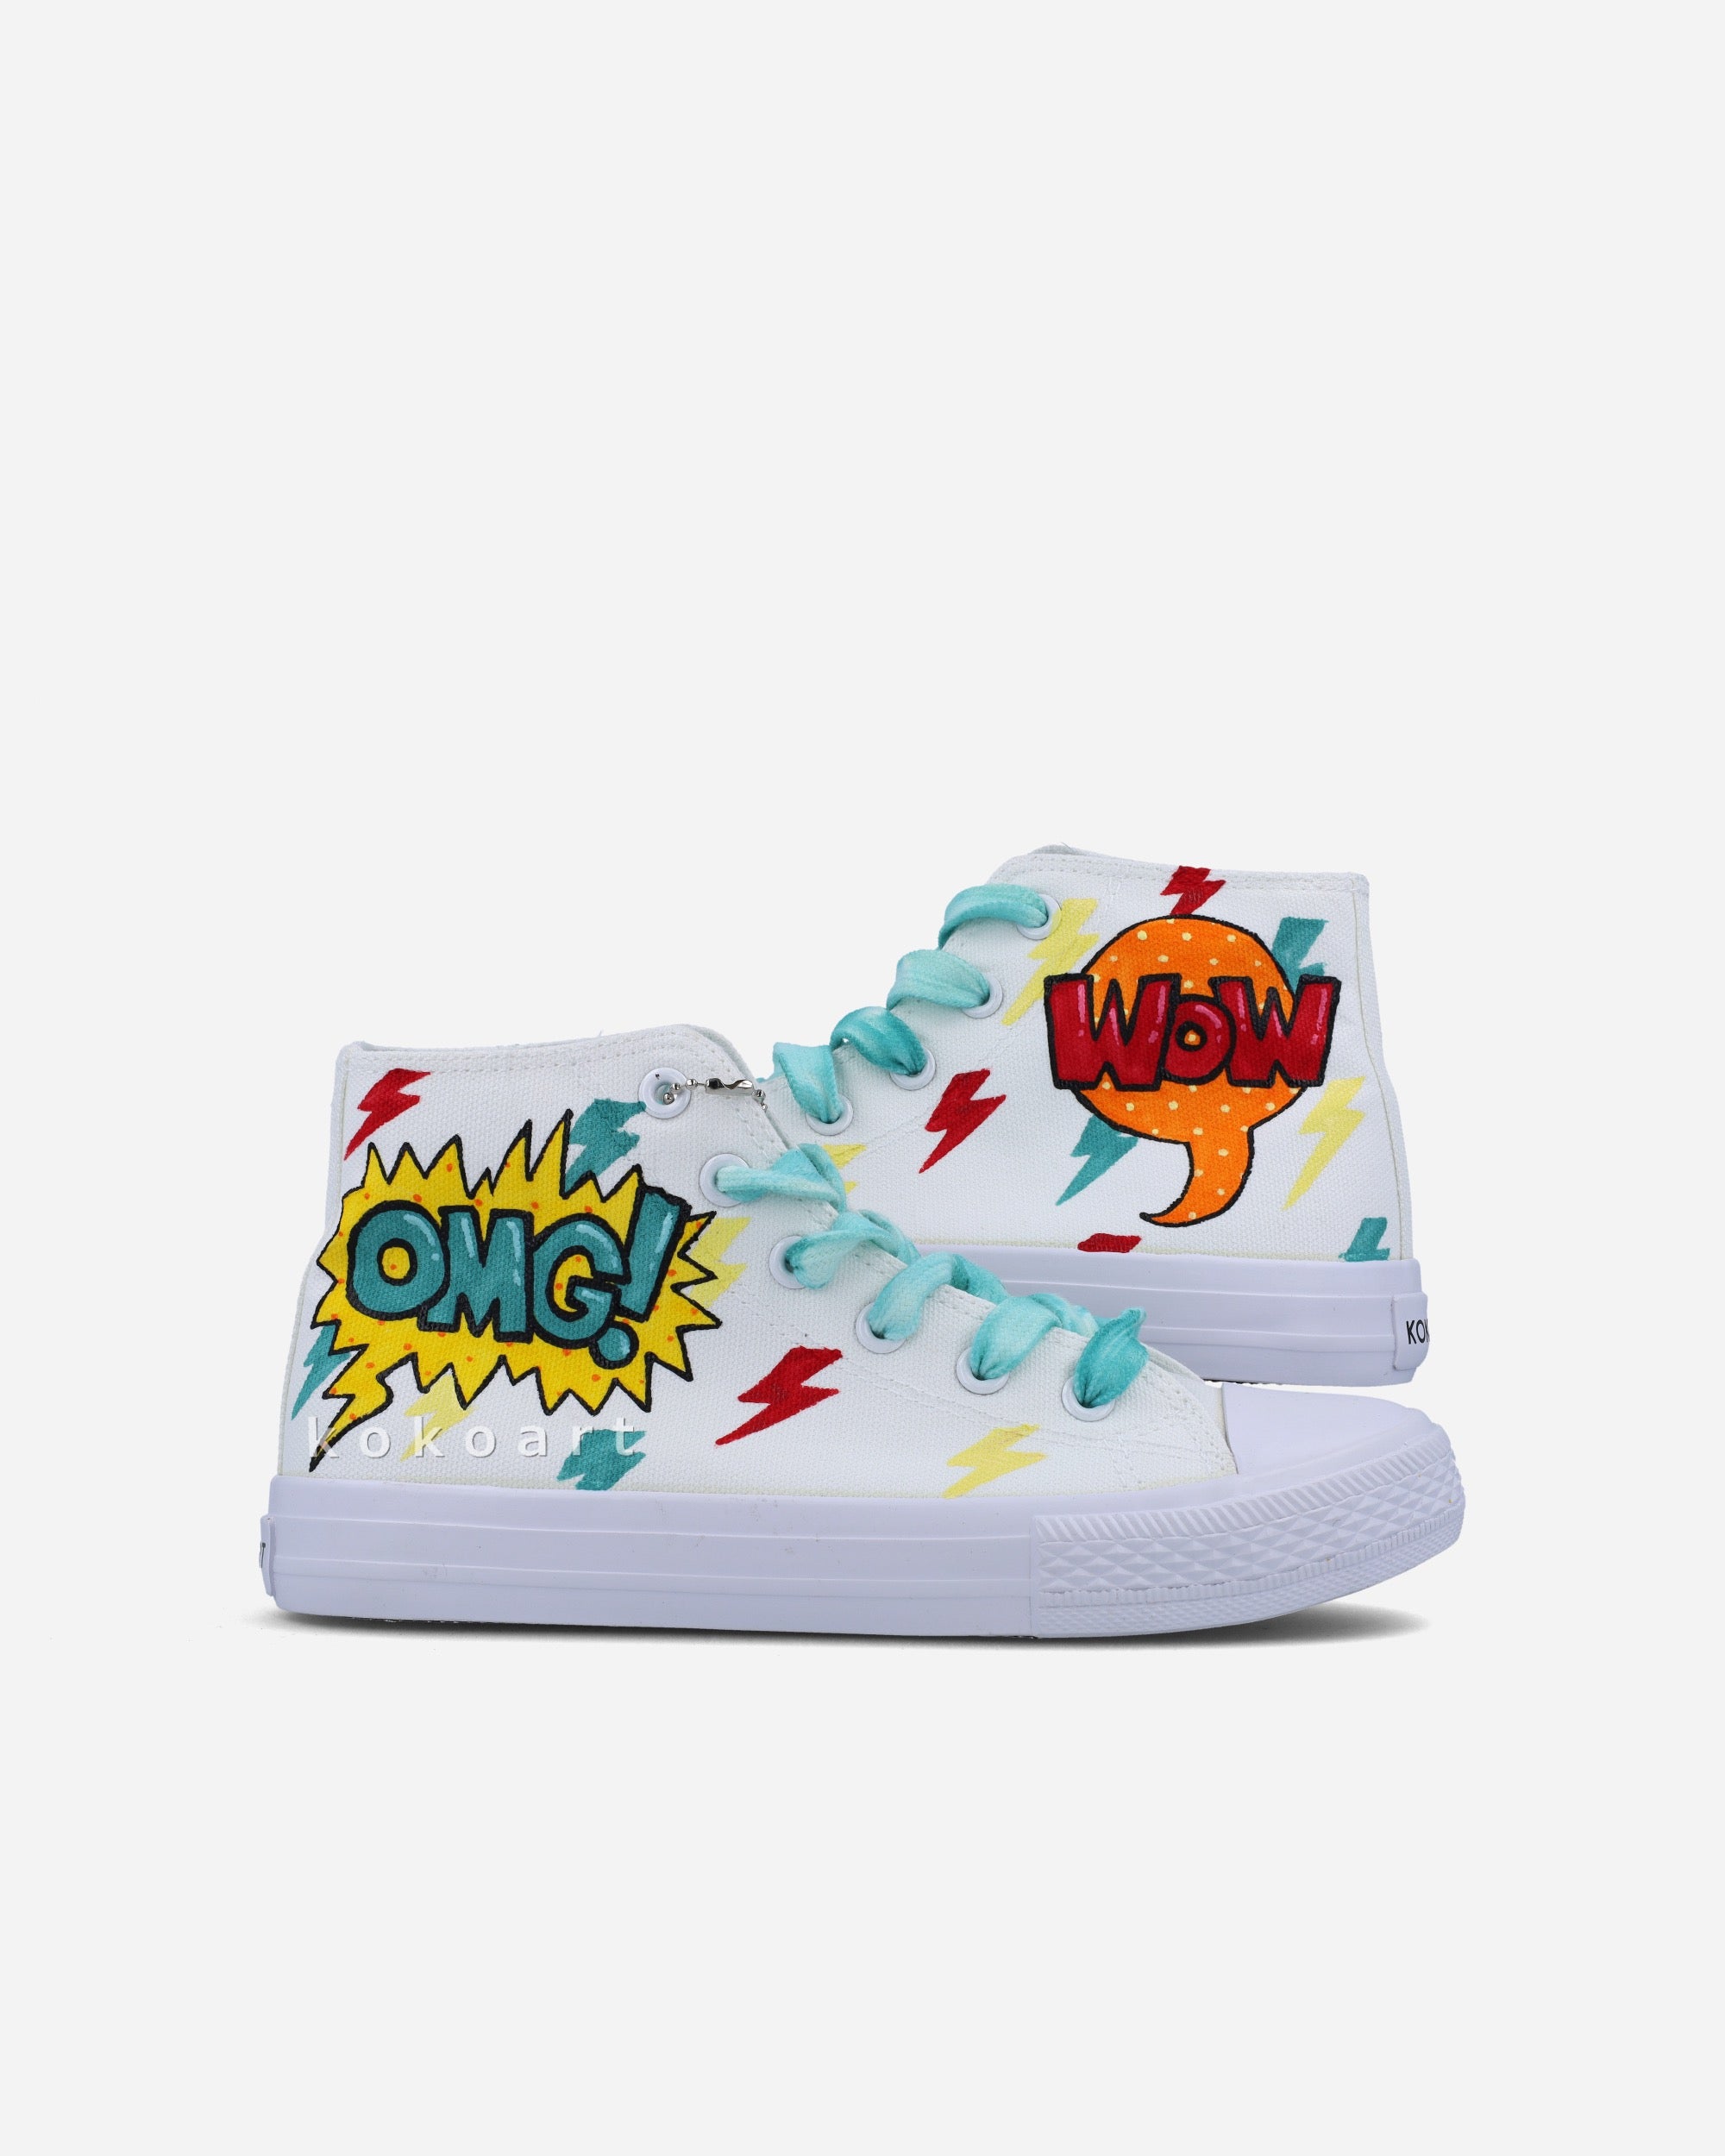 Wow Omg Comic Hand Painted Shoes by